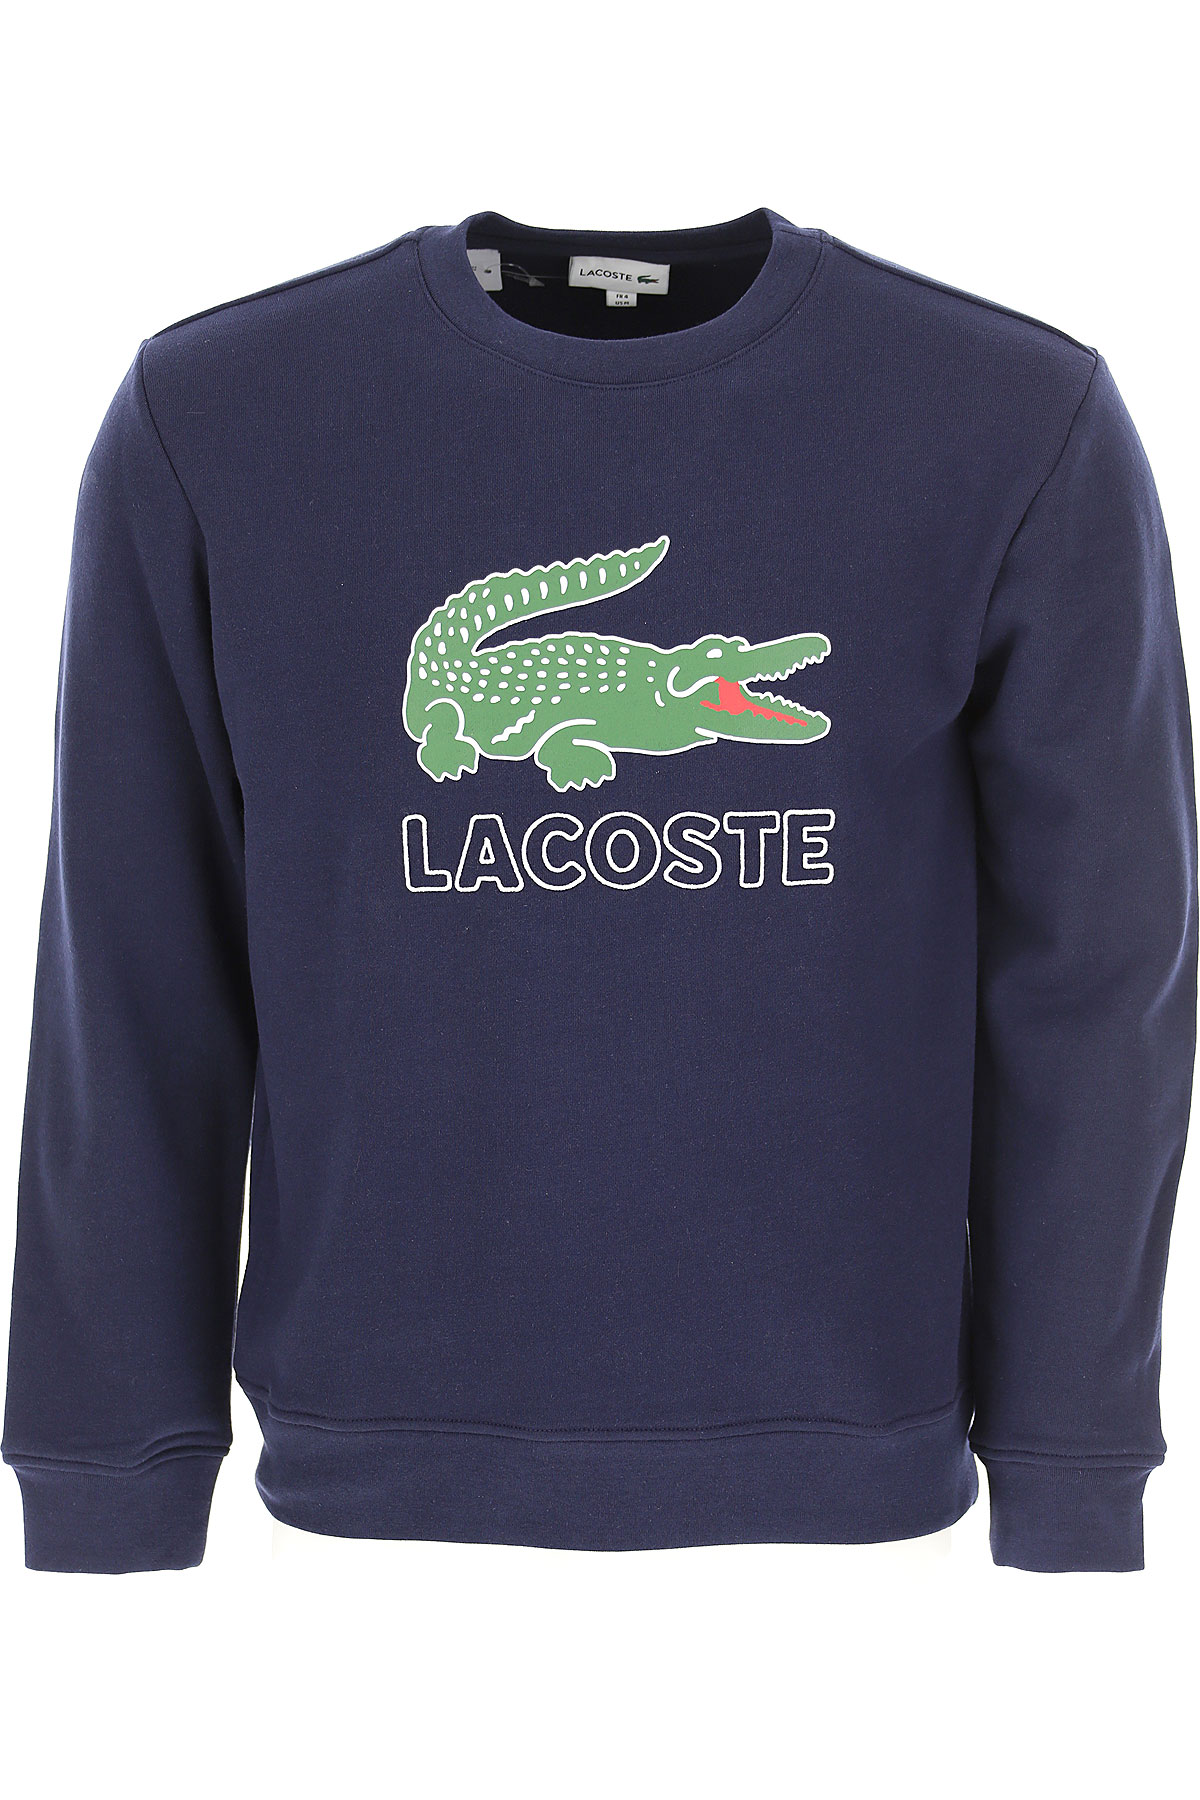 Mens Clothing Lacoste, Style code: 419809-166-